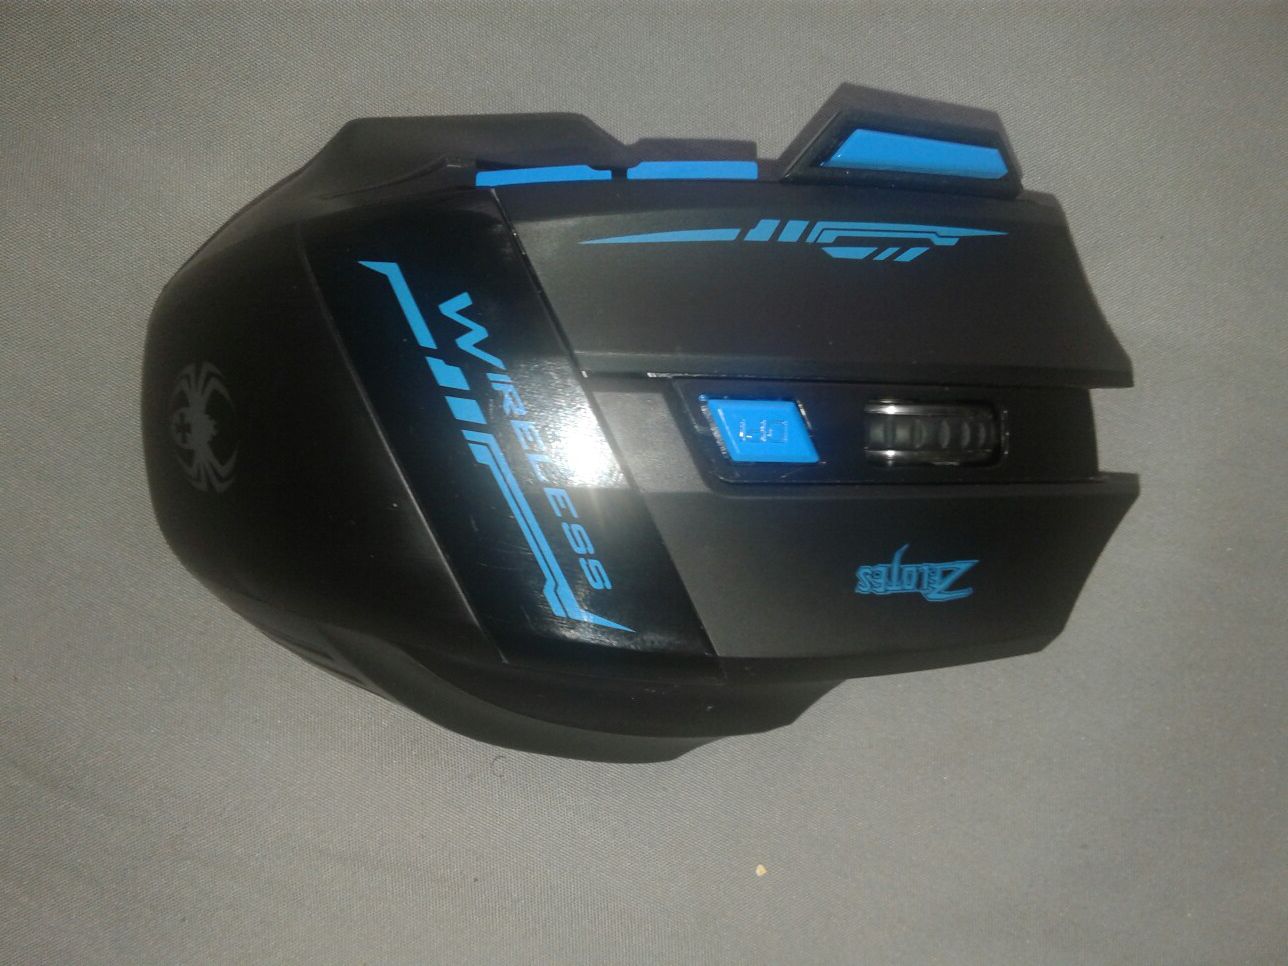 Pro Gaming Mouse